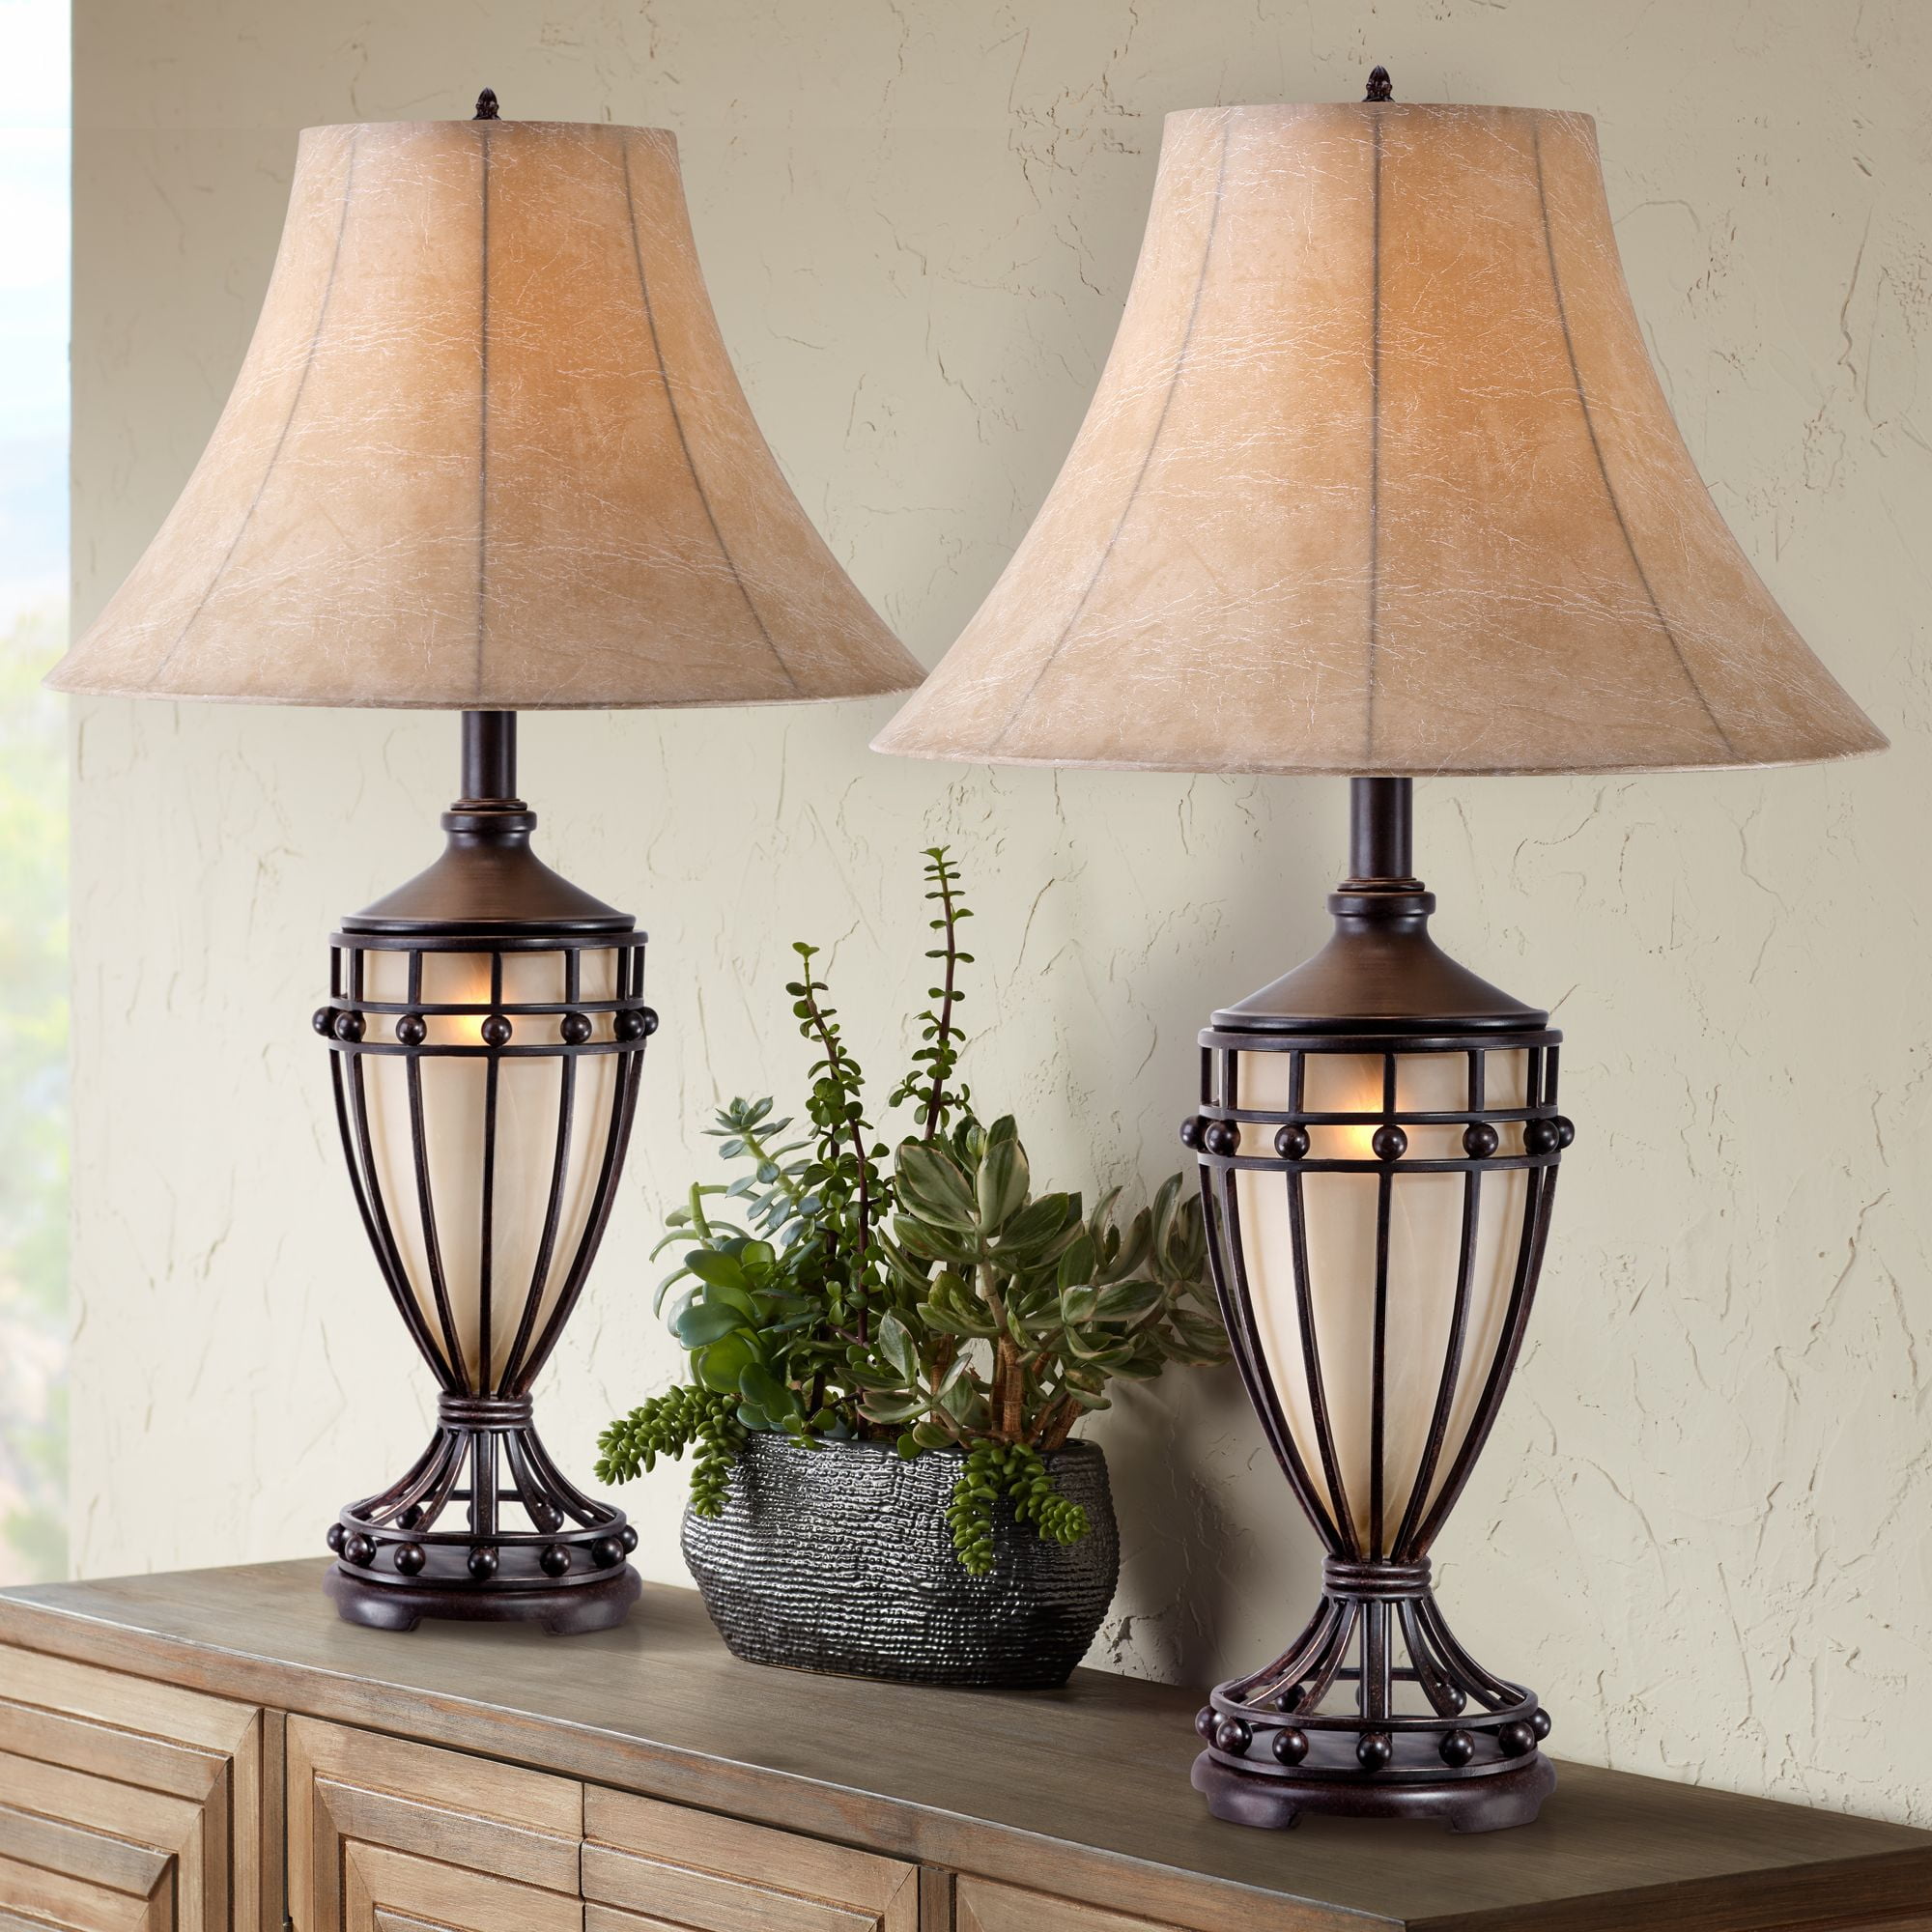 Sitcom vrijdag incident Franklin Iron Works Traditional Table Lamps 33" Tall Set of 2 with  Nightlight Brushed Iron Urn Beige Fabric Shade for Living Room Bedroom -  Walmart.com